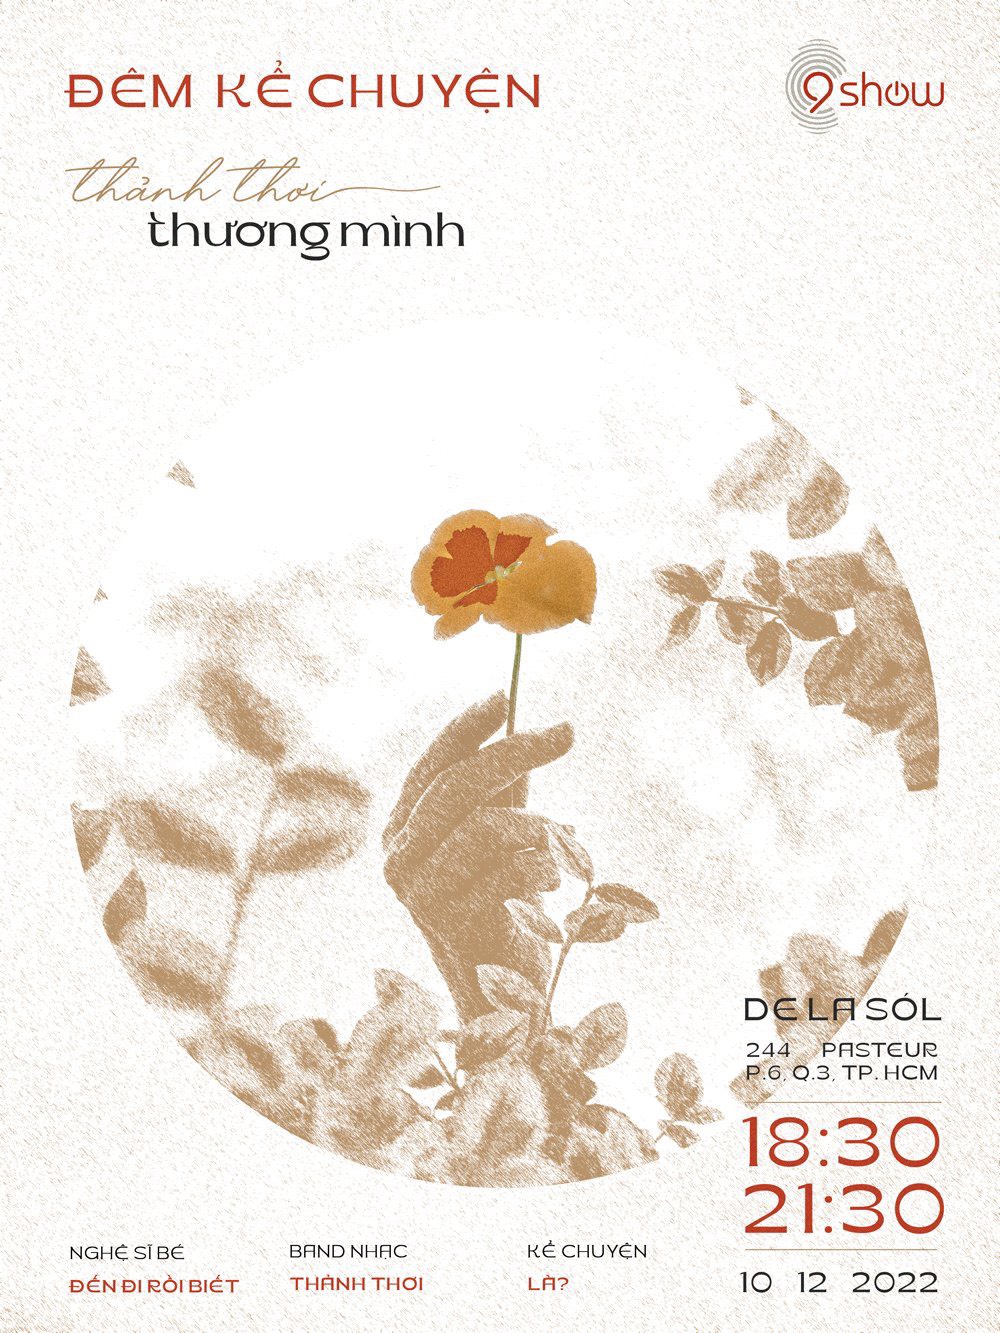 Dem-nhac-thanh-thoi-thuong-minh-9show-poster